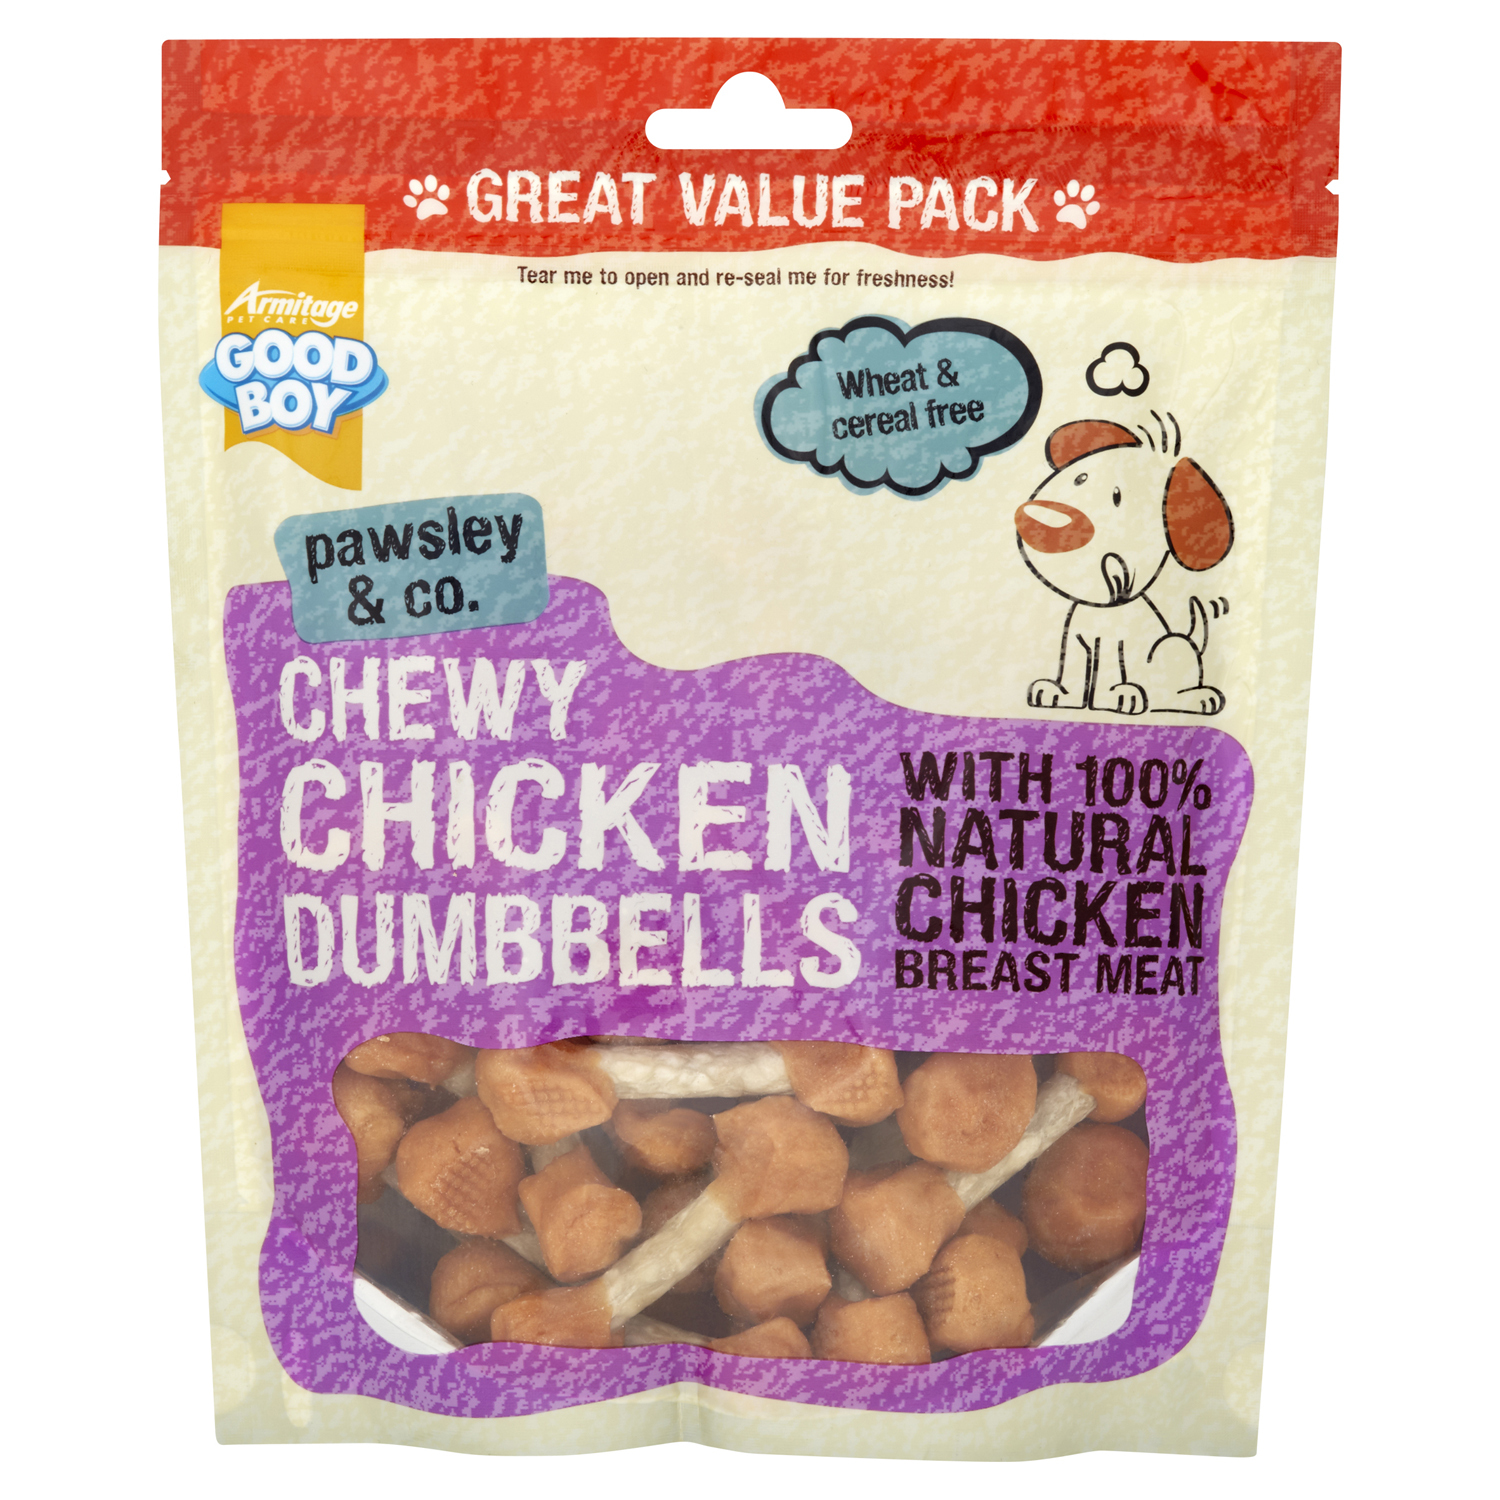 Good Boy Pawsley Chewy Chicken Dumbbells Dog Treat 350g Image